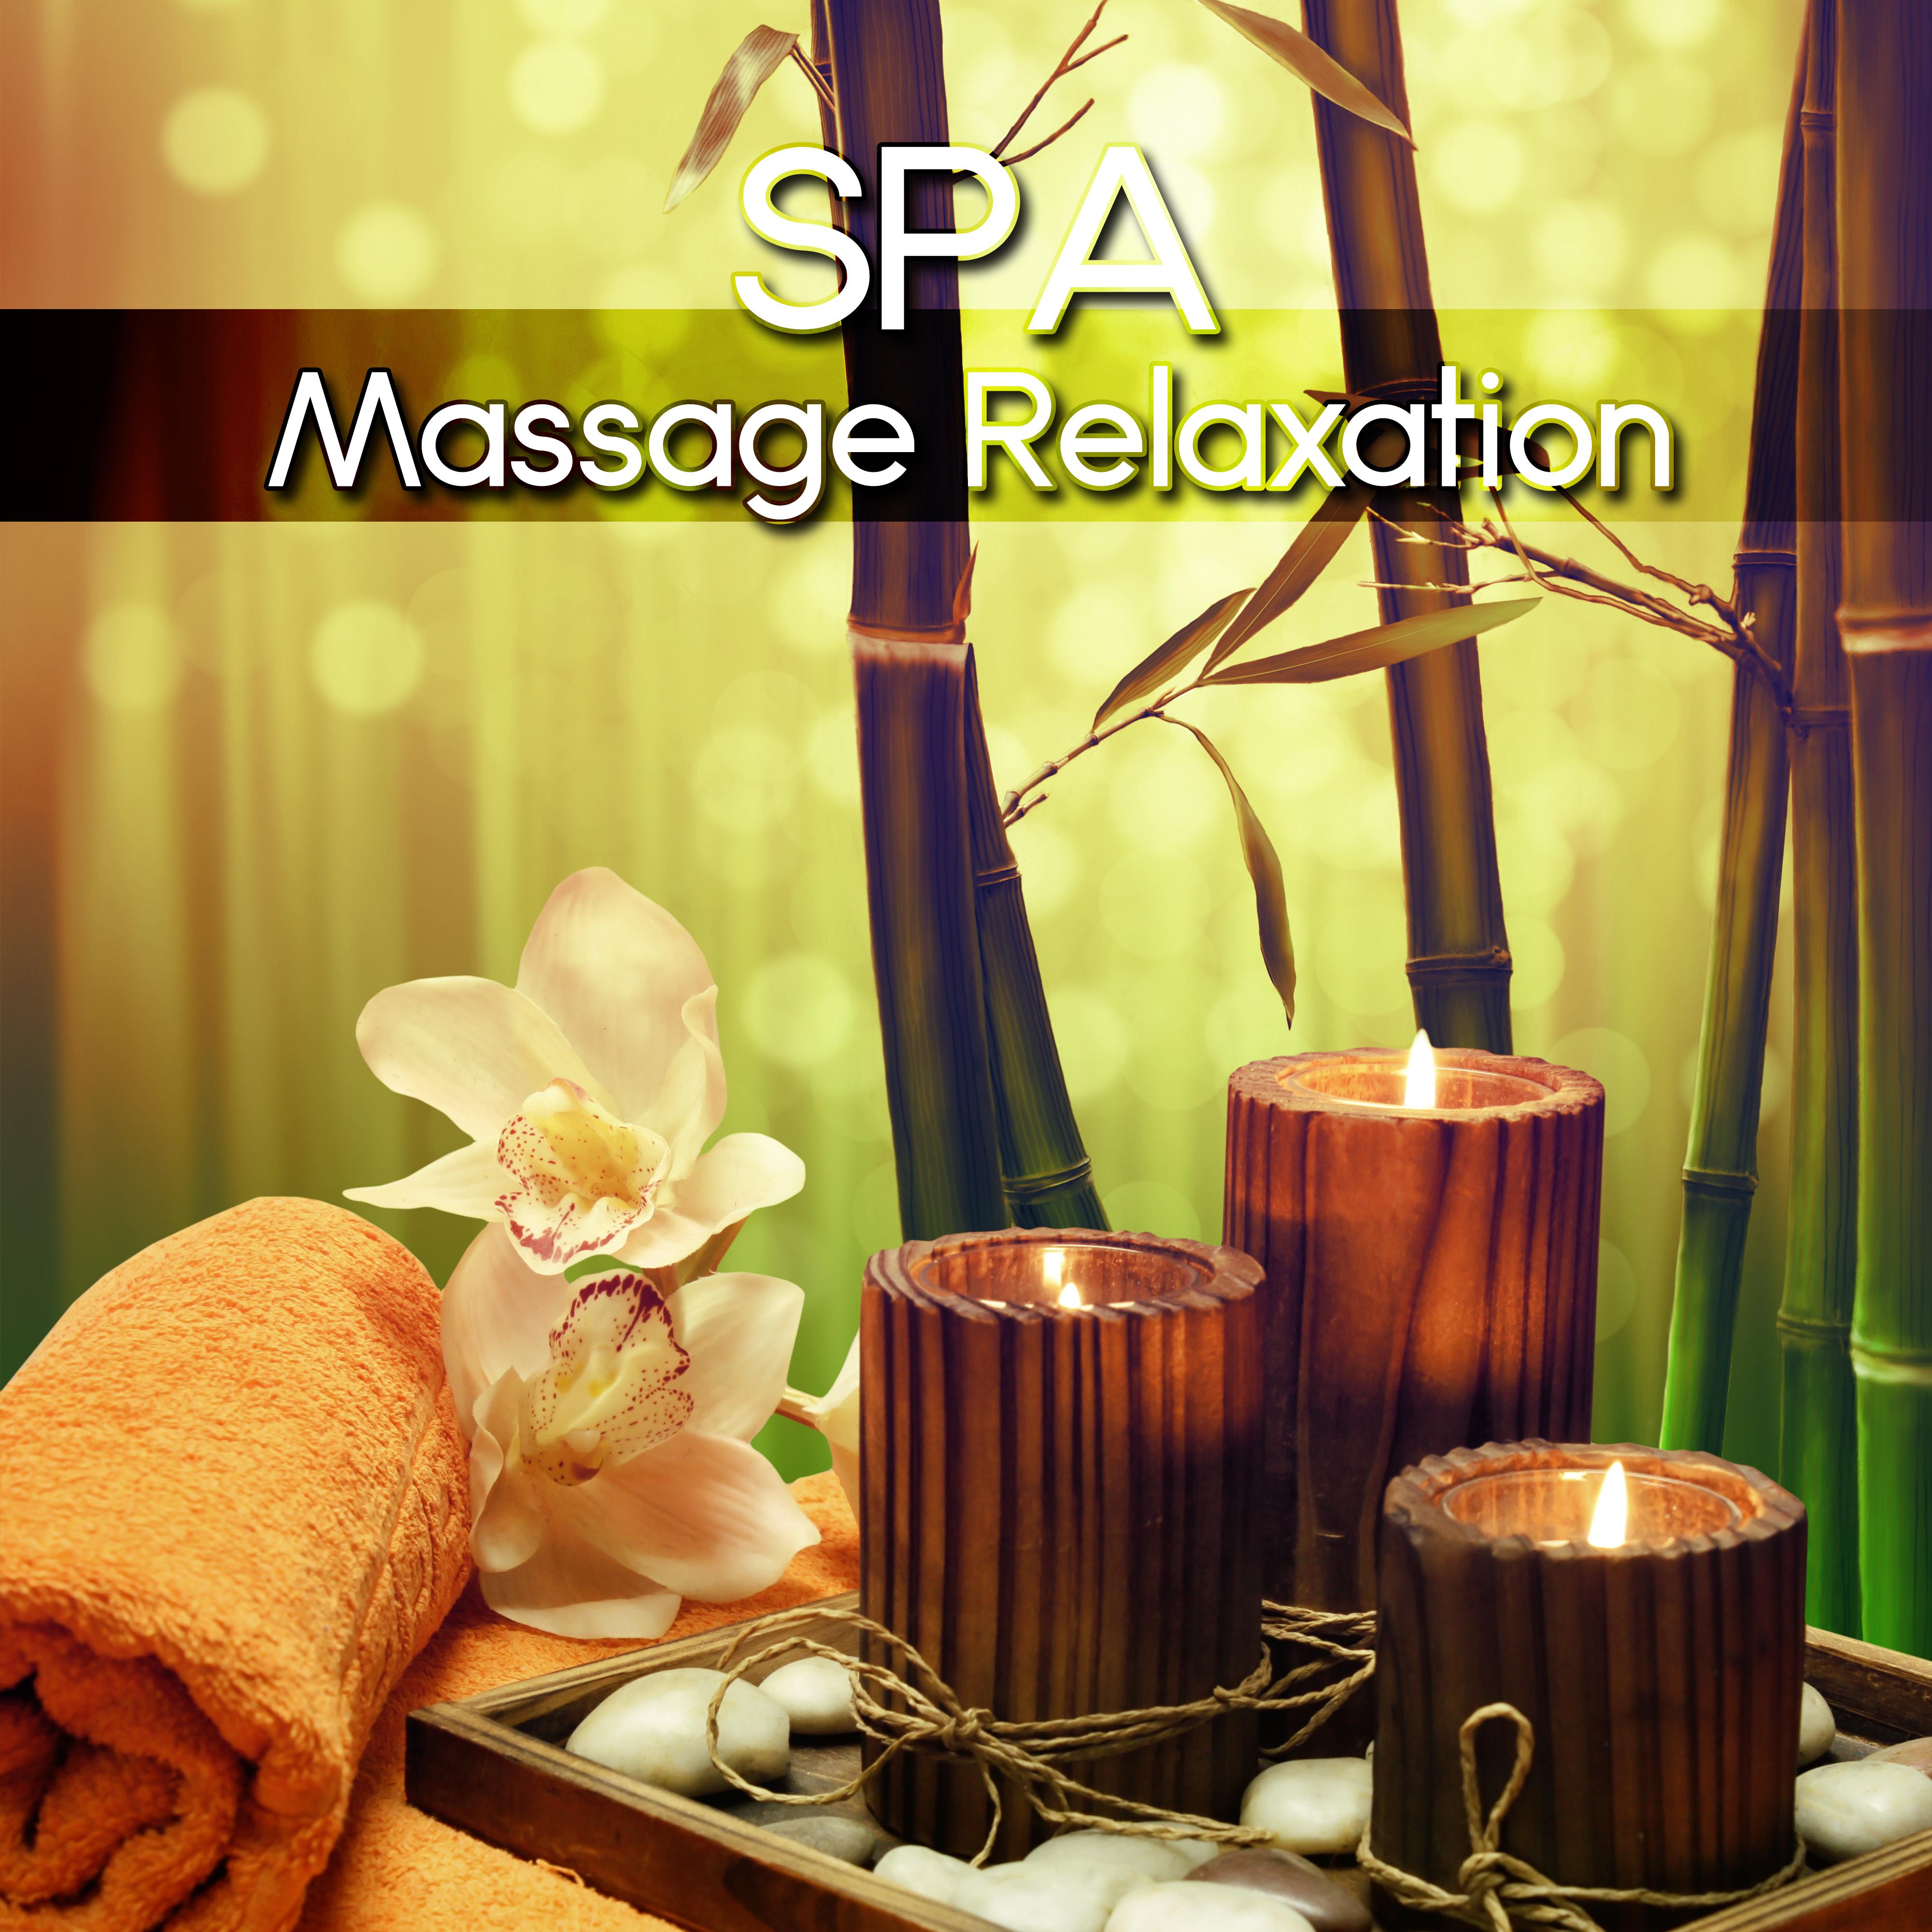 SPA Massage Relaxation  Asian Zen SPA Music for Relaxation, Yoga Meditation Sound Therapy, Nature Sounds for Stress Relief and Stress Free, Tranquility SPA Wellness Center